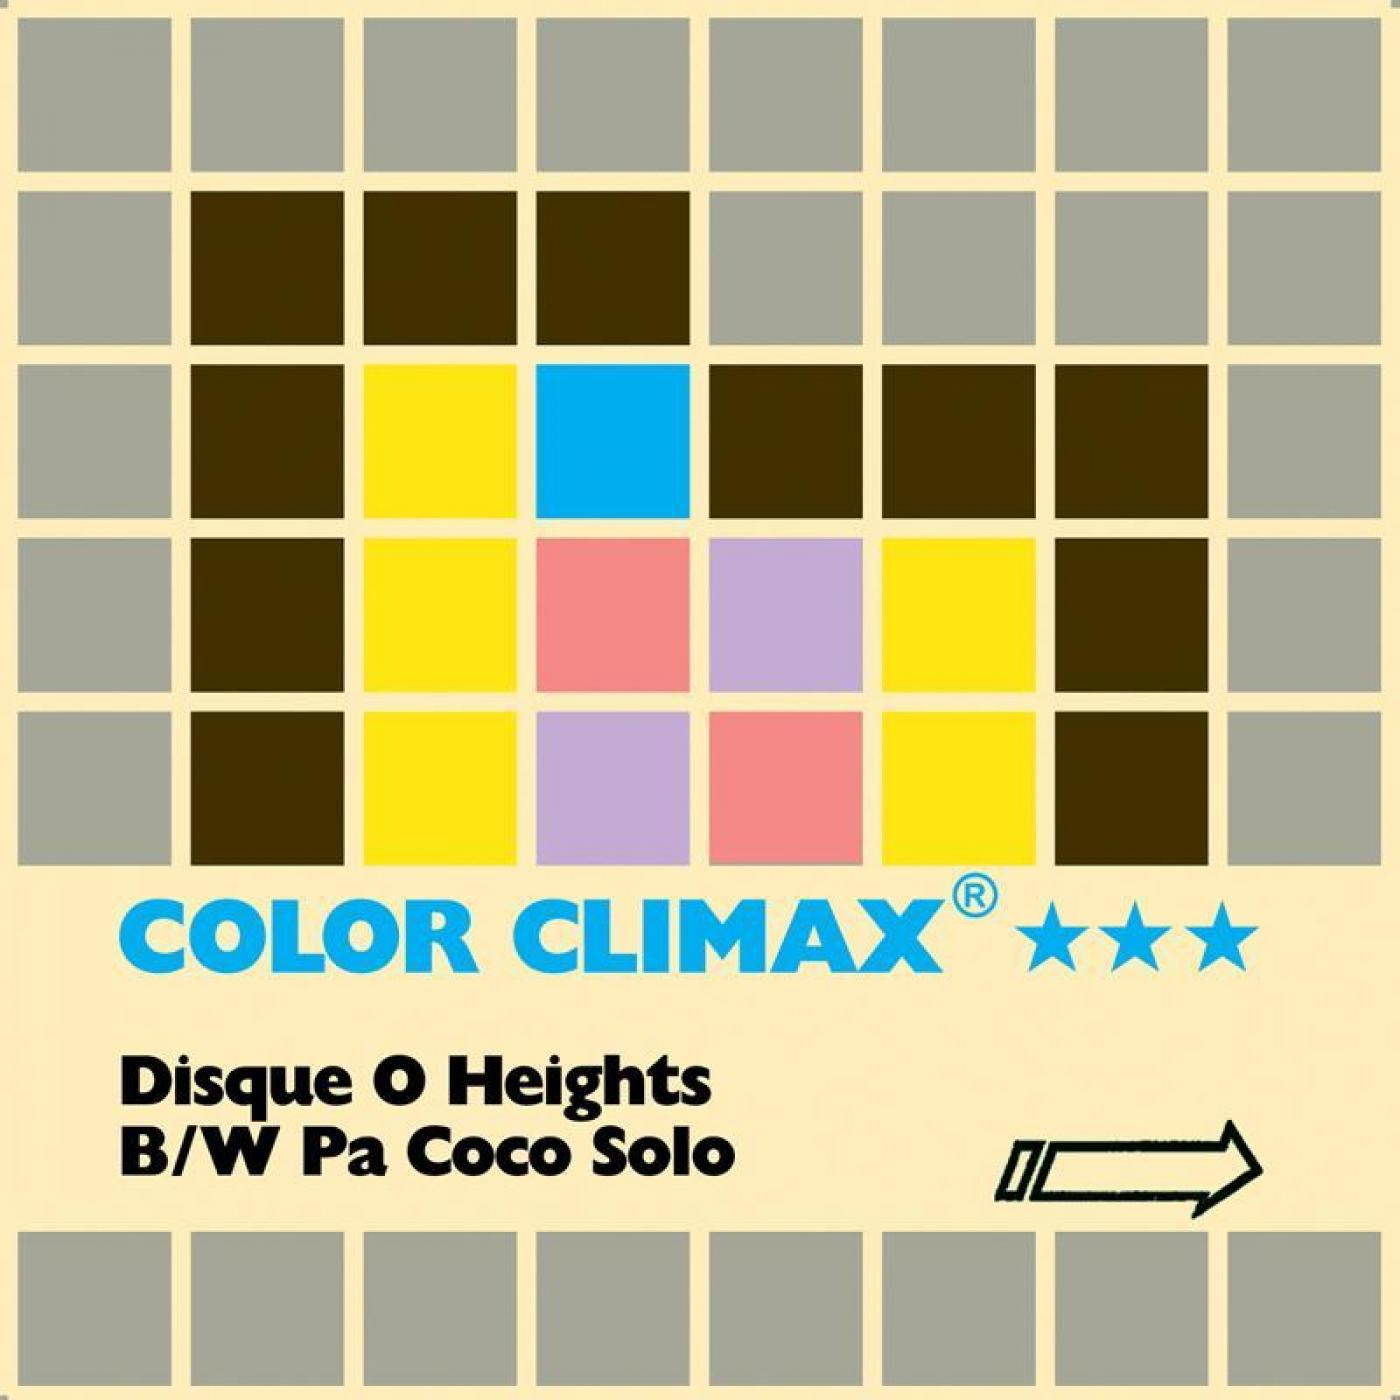 Disque O Heights Pa Coco Solo Color Climax Kudos Records Effy Moom Free Coloring Picture wallpaper give a chance to color on the wall without getting in trouble! Fill the walls of your home or office with stress-relieving [effymoom.blogspot.com]